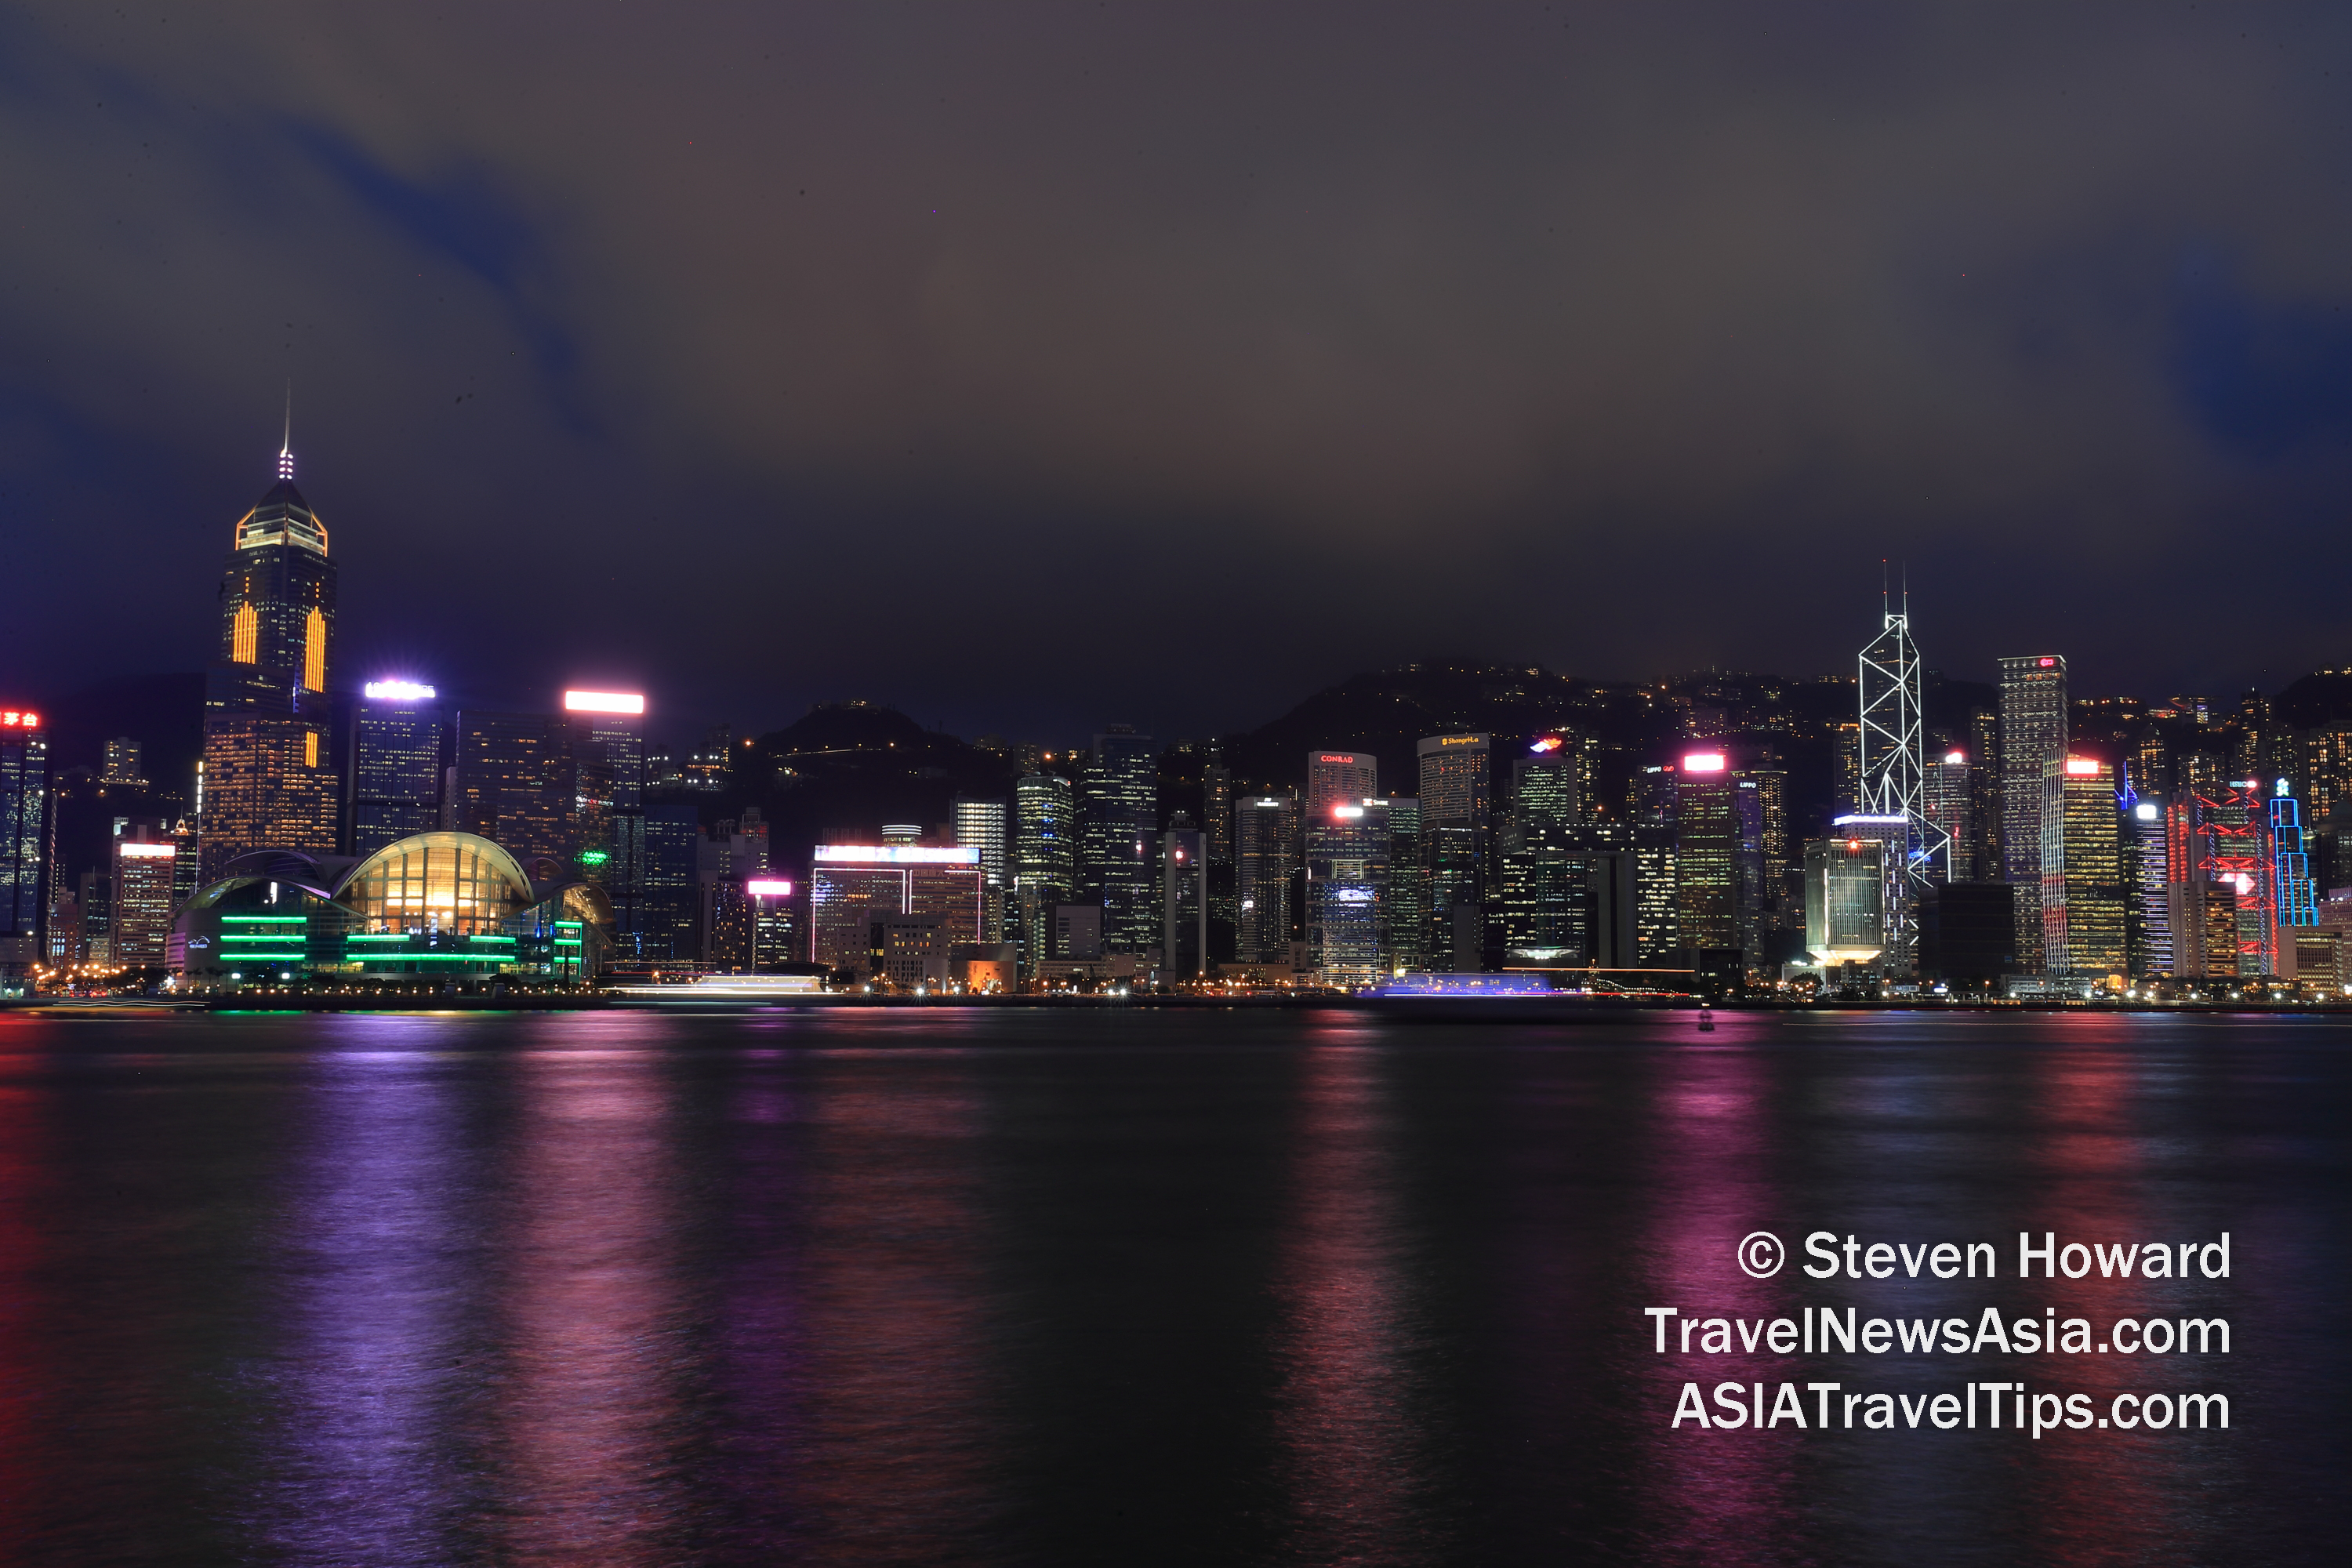 Hong Kong Island and Victoria Harbour as seen from TST. Picture by Steven Howard of TravelNewsAsia.com Click to enlarge.